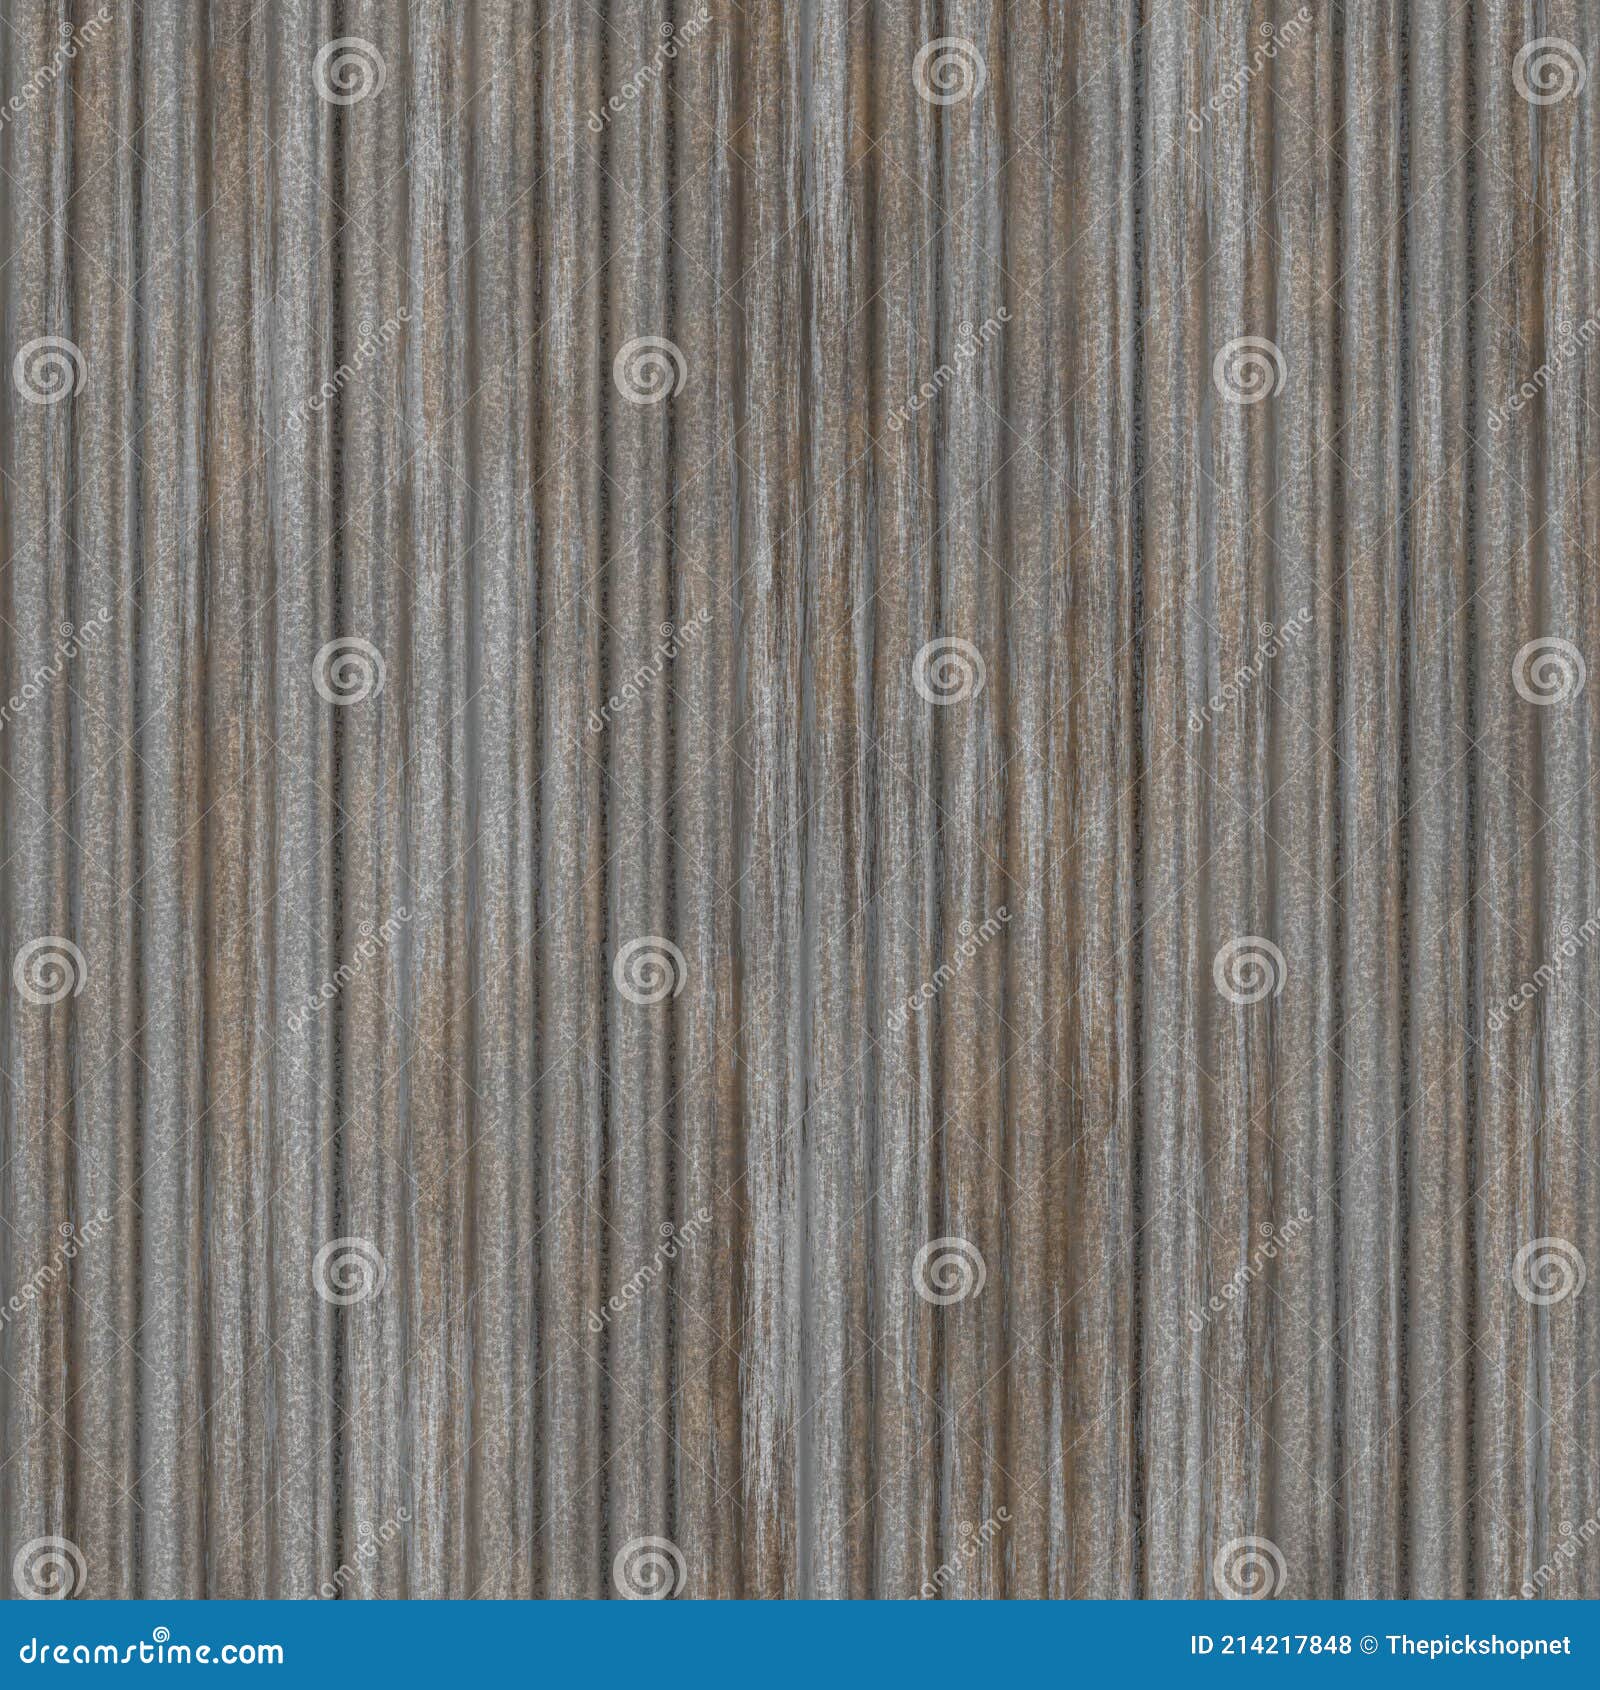 corrugated and rusty galvanized metal panel